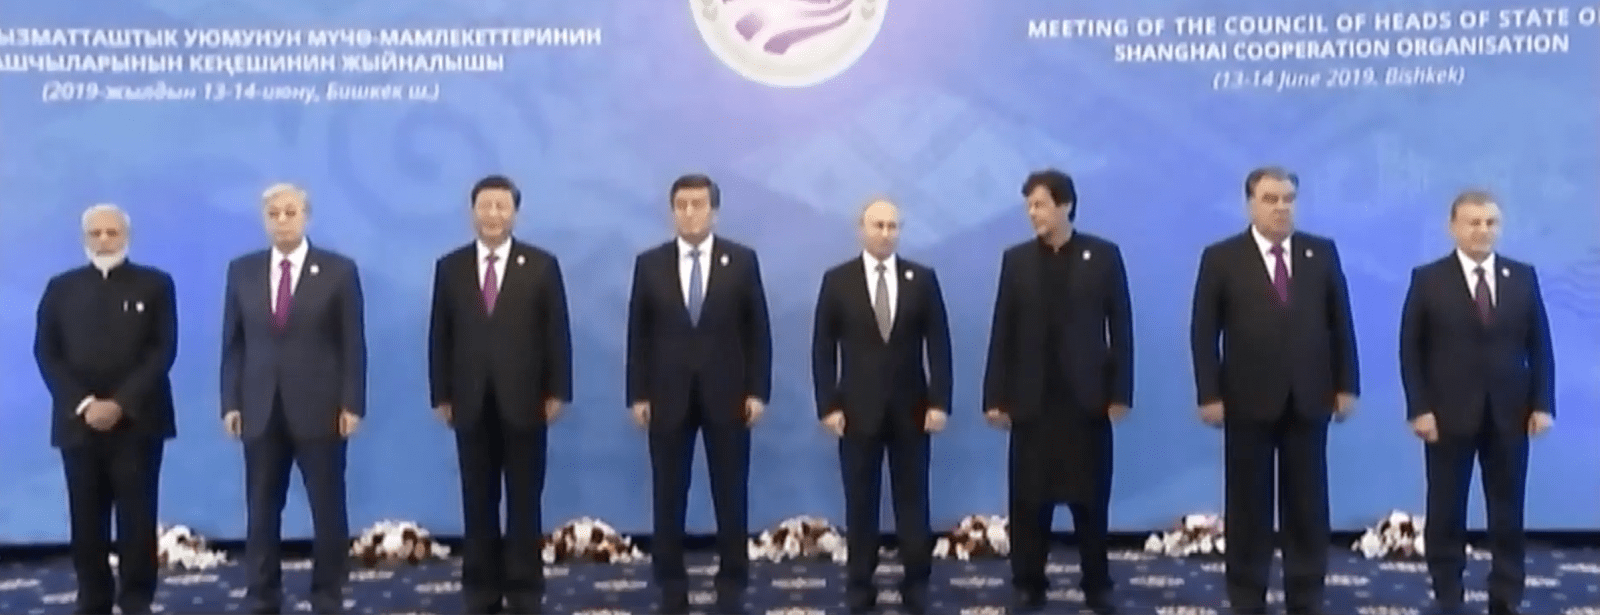 Shanghai Cooperation Organization and what it can do for Eurasia